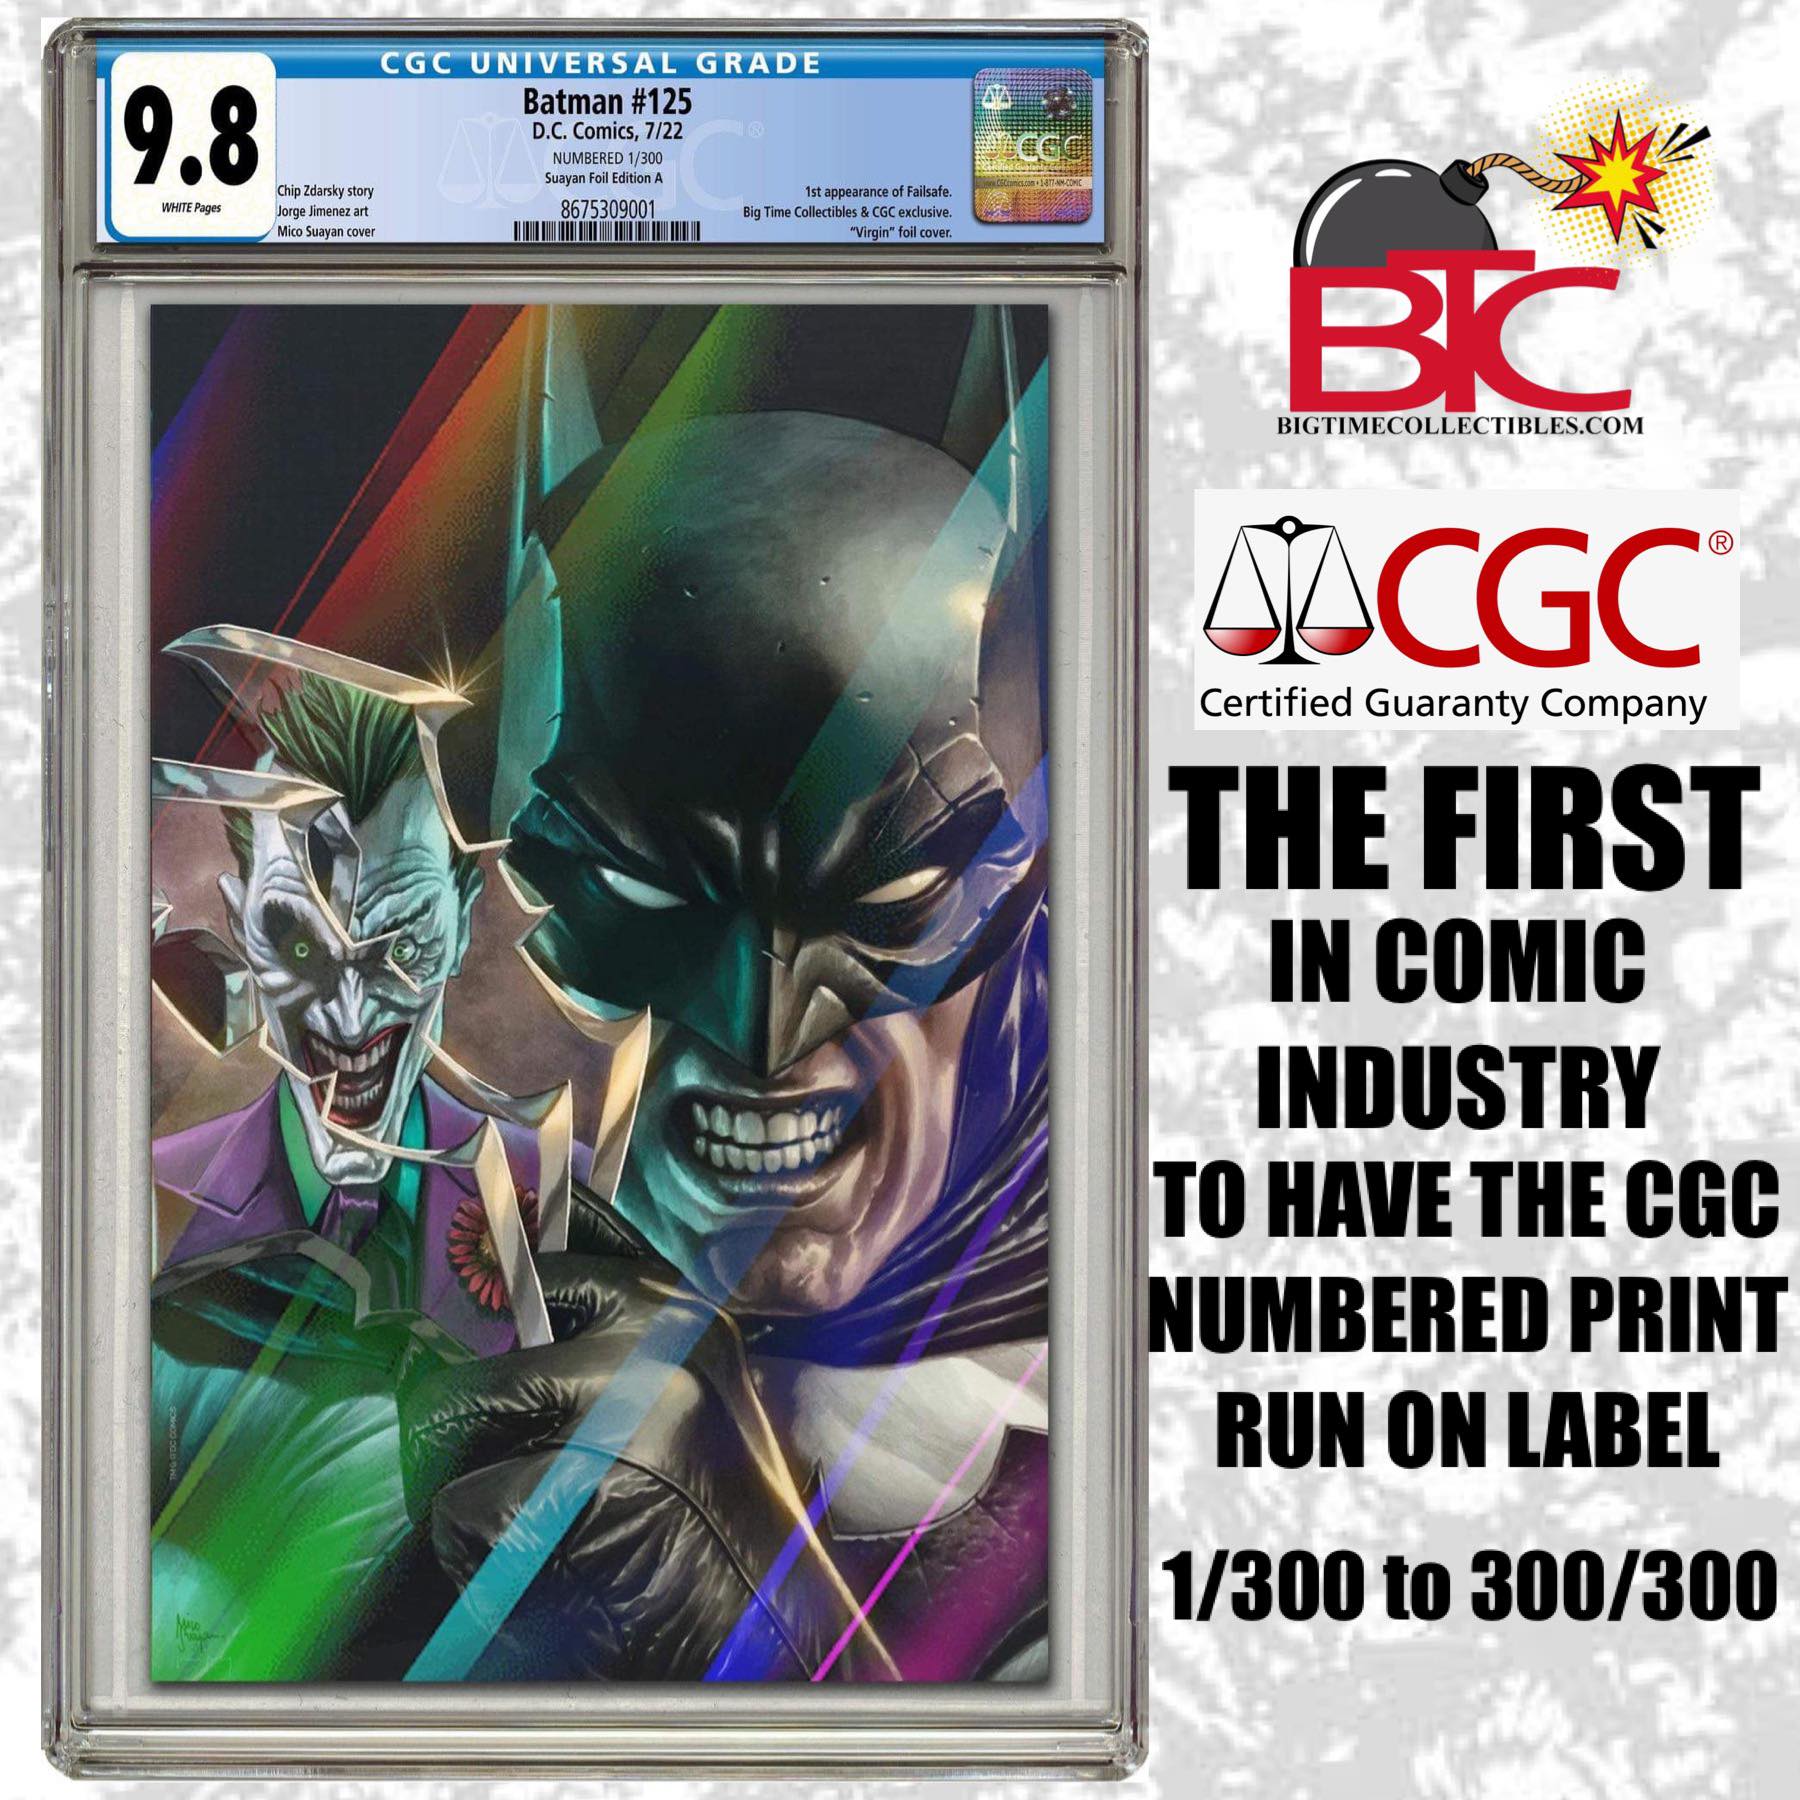 BATMAN #125 MICO SUAYAN CGC EXCLUSIVE FOIL VARIANT COVERS CGC 9.8 LIMITED TO 300 COPIES